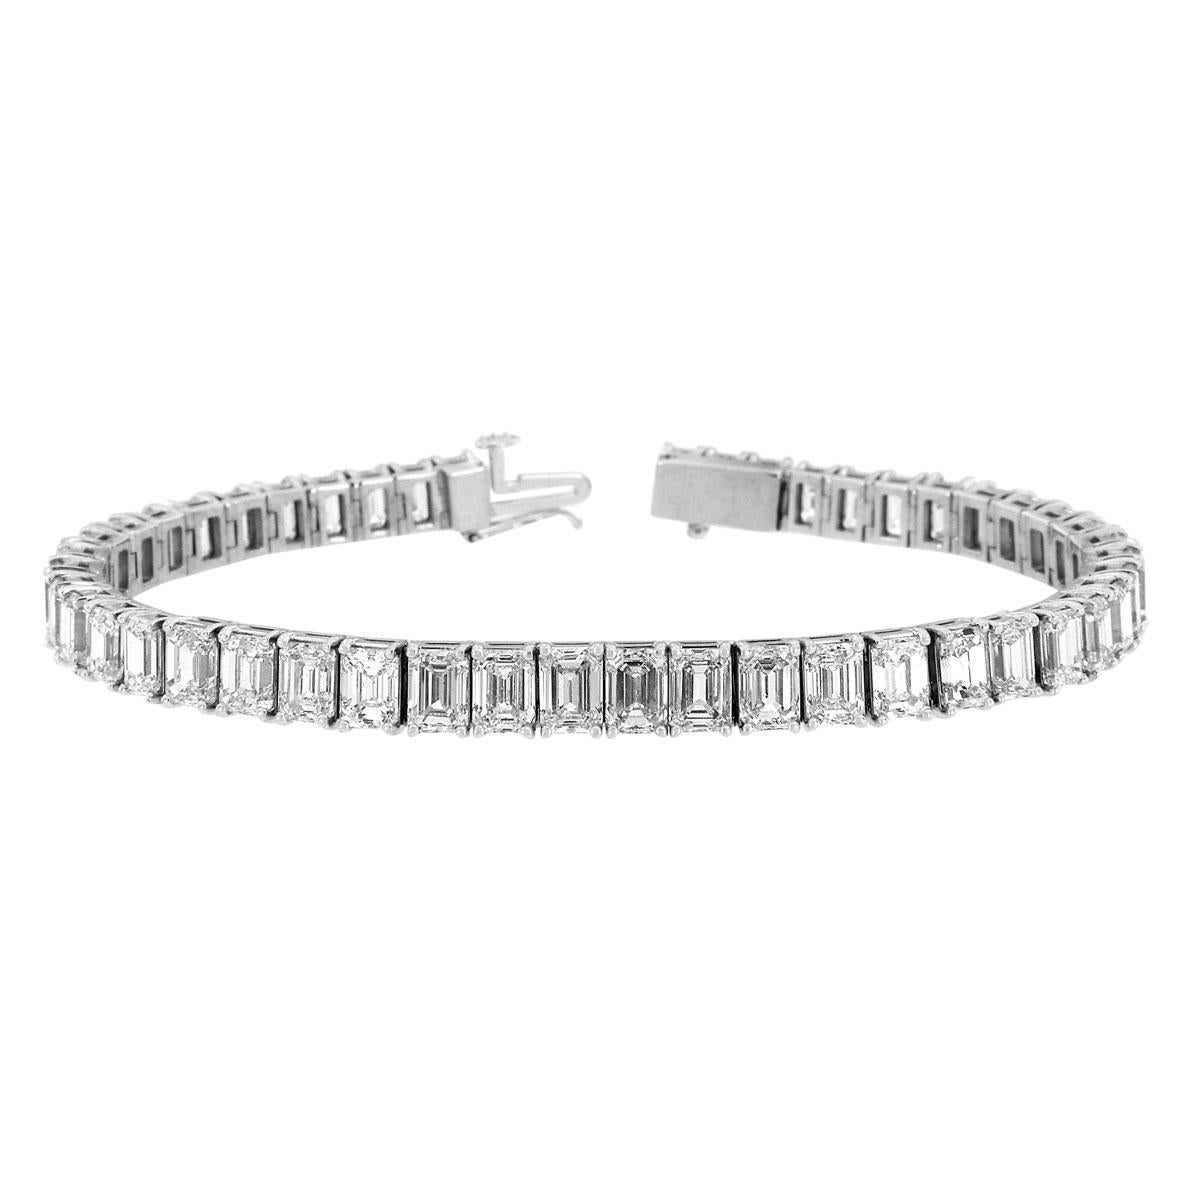 This timeless four prongs diamonds tennis bracelet feature 47 perfectly matched Emerald Shape Diamonds. Experience the Difference!

Product details: 

Center Gemstone Type: NATURAL DIAMOND
Center Gemstone Color: WHITE
Center Gemstone Shape: